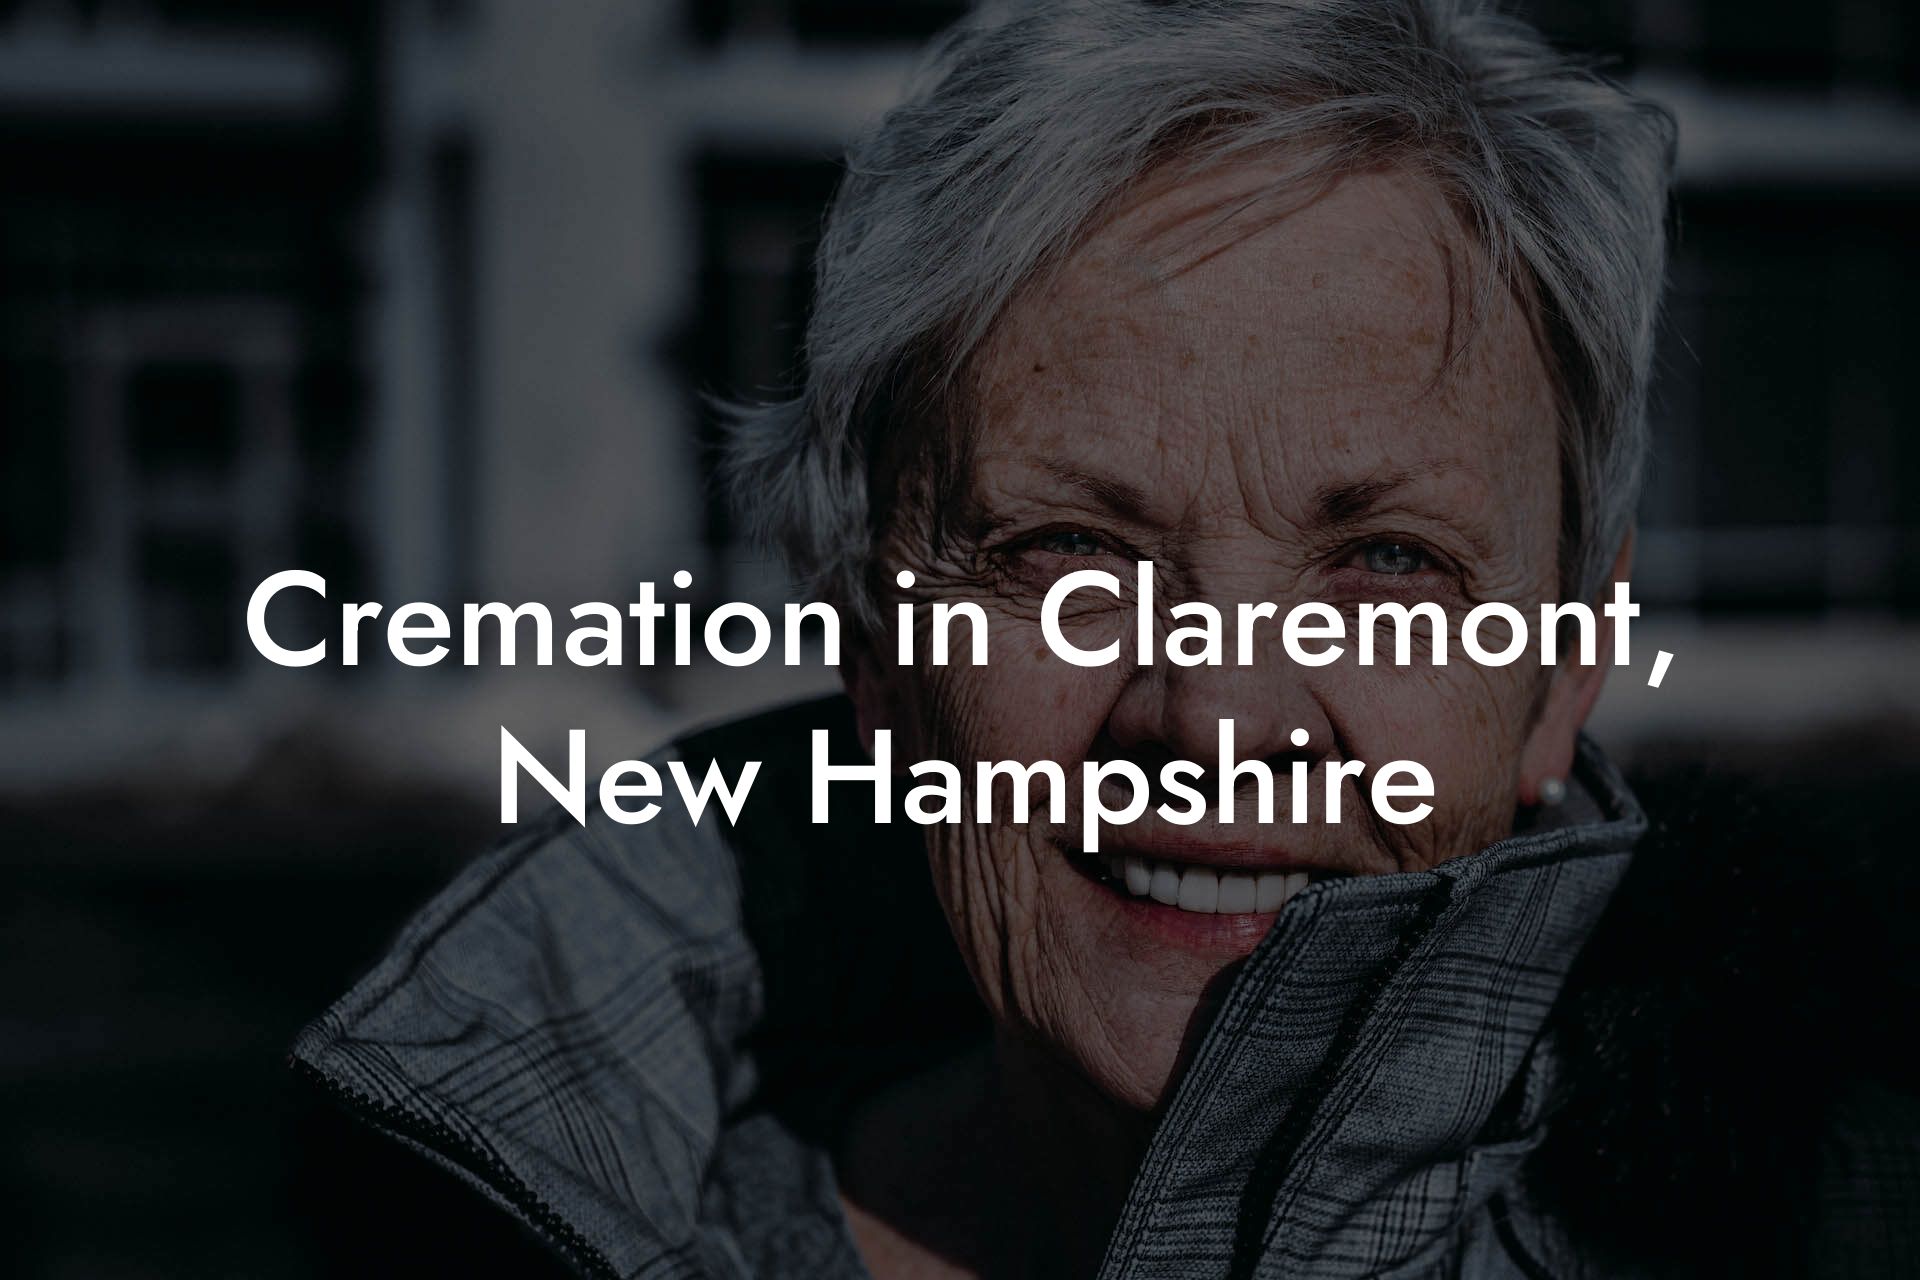 Cremation in Claremont, New Hampshire